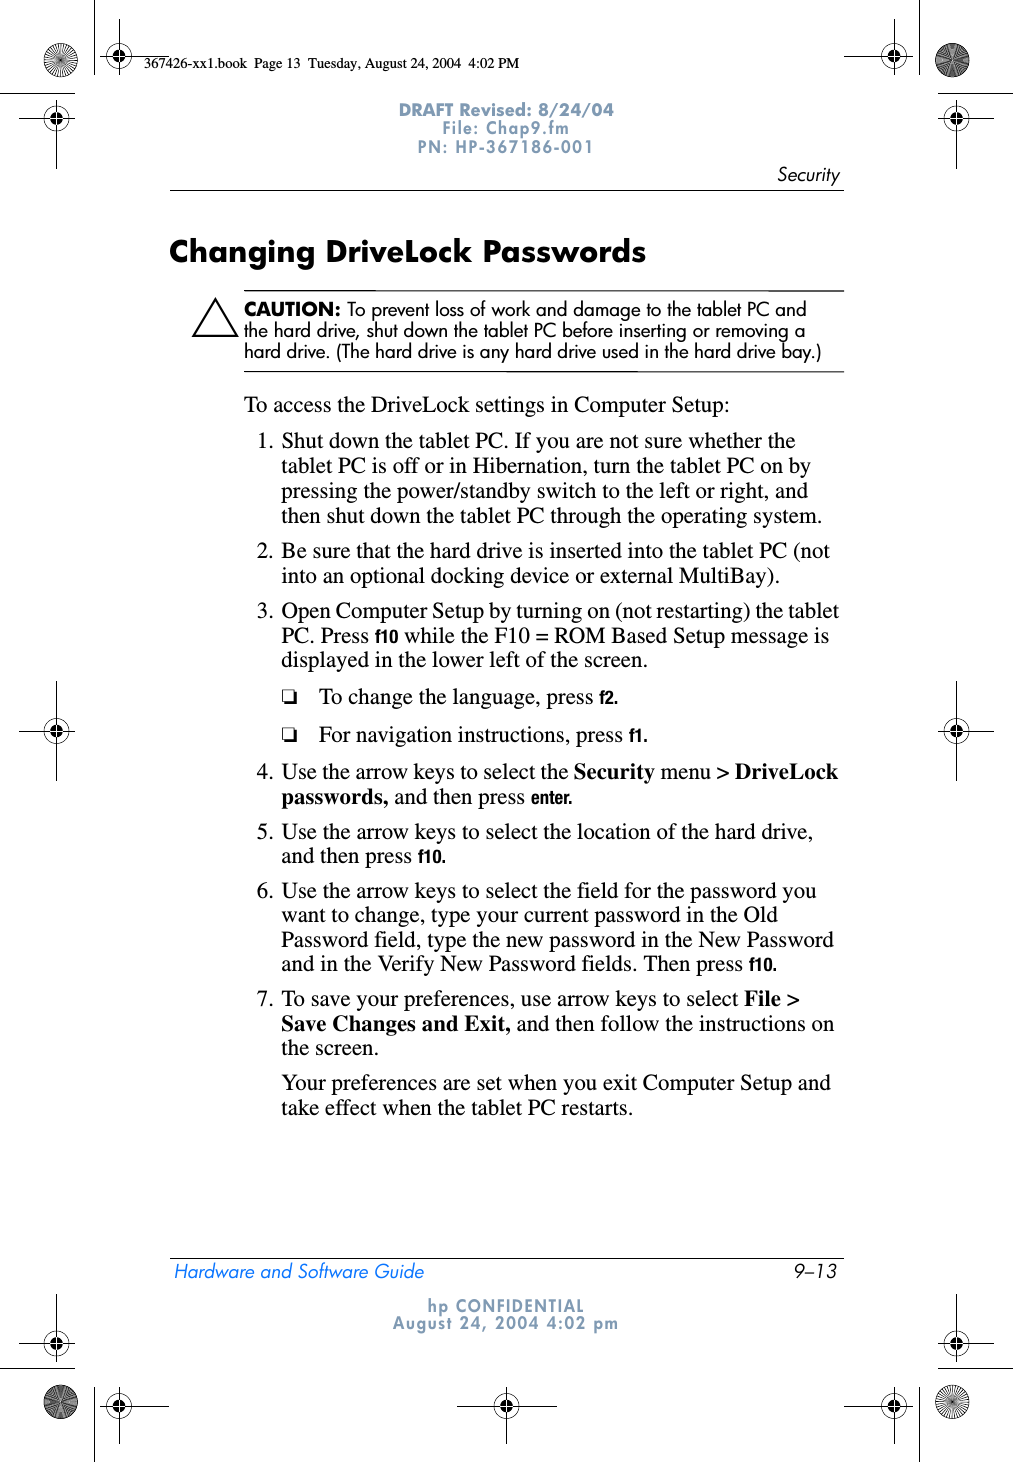 SecurityHardware and Software Guide 9–13DRAFT Revised: 8/24/04File: Chap9.fm PN: HP-367186-001 hp CONFIDENTIALAugust 24, 2004 4:02 pmChanging DriveLock PasswordsÄCAUTION: To prevent loss of work and damage to the tablet PC and the hard drive, shut down the tablet PC before inserting or removing a hard drive. (The hard drive is any hard drive used in the hard drive bay.)To access the DriveLock settings in Computer Setup:1. Shut down the tablet PC. If you are not sure whether the tablet PC is off or in Hibernation, turn the tablet PC on by pressing the power/standby switch to the left or right, and then shut down the tablet PC through the operating system.2. Be sure that the hard drive is inserted into the tablet PC (not into an optional docking device or external MultiBay).3. Open Computer Setup by turning on (not restarting) the tablet PC. Press f10 while the F10 = ROM Based Setup message is displayed in the lower left of the screen.❏To change the language, press f2.❏For navigation instructions, press f1.4. Use the arrow keys to select the Security menu &gt; DriveLock passwords, and then press enter.5. Use the arrow keys to select the location of the hard drive, and then press f10.6. Use the arrow keys to select the field for the password you want to change, type your current password in the Old Password field, type the new password in the New Password and in the Verify New Password fields. Then press f10.7. To save your preferences, use arrow keys to select File &gt; Save Changes and Exit, and then follow the instructions on the screen.Your preferences are set when you exit Computer Setup and take effect when the tablet PC restarts.367426-xx1.book  Page 13  Tuesday, August 24, 2004  4:02 PM